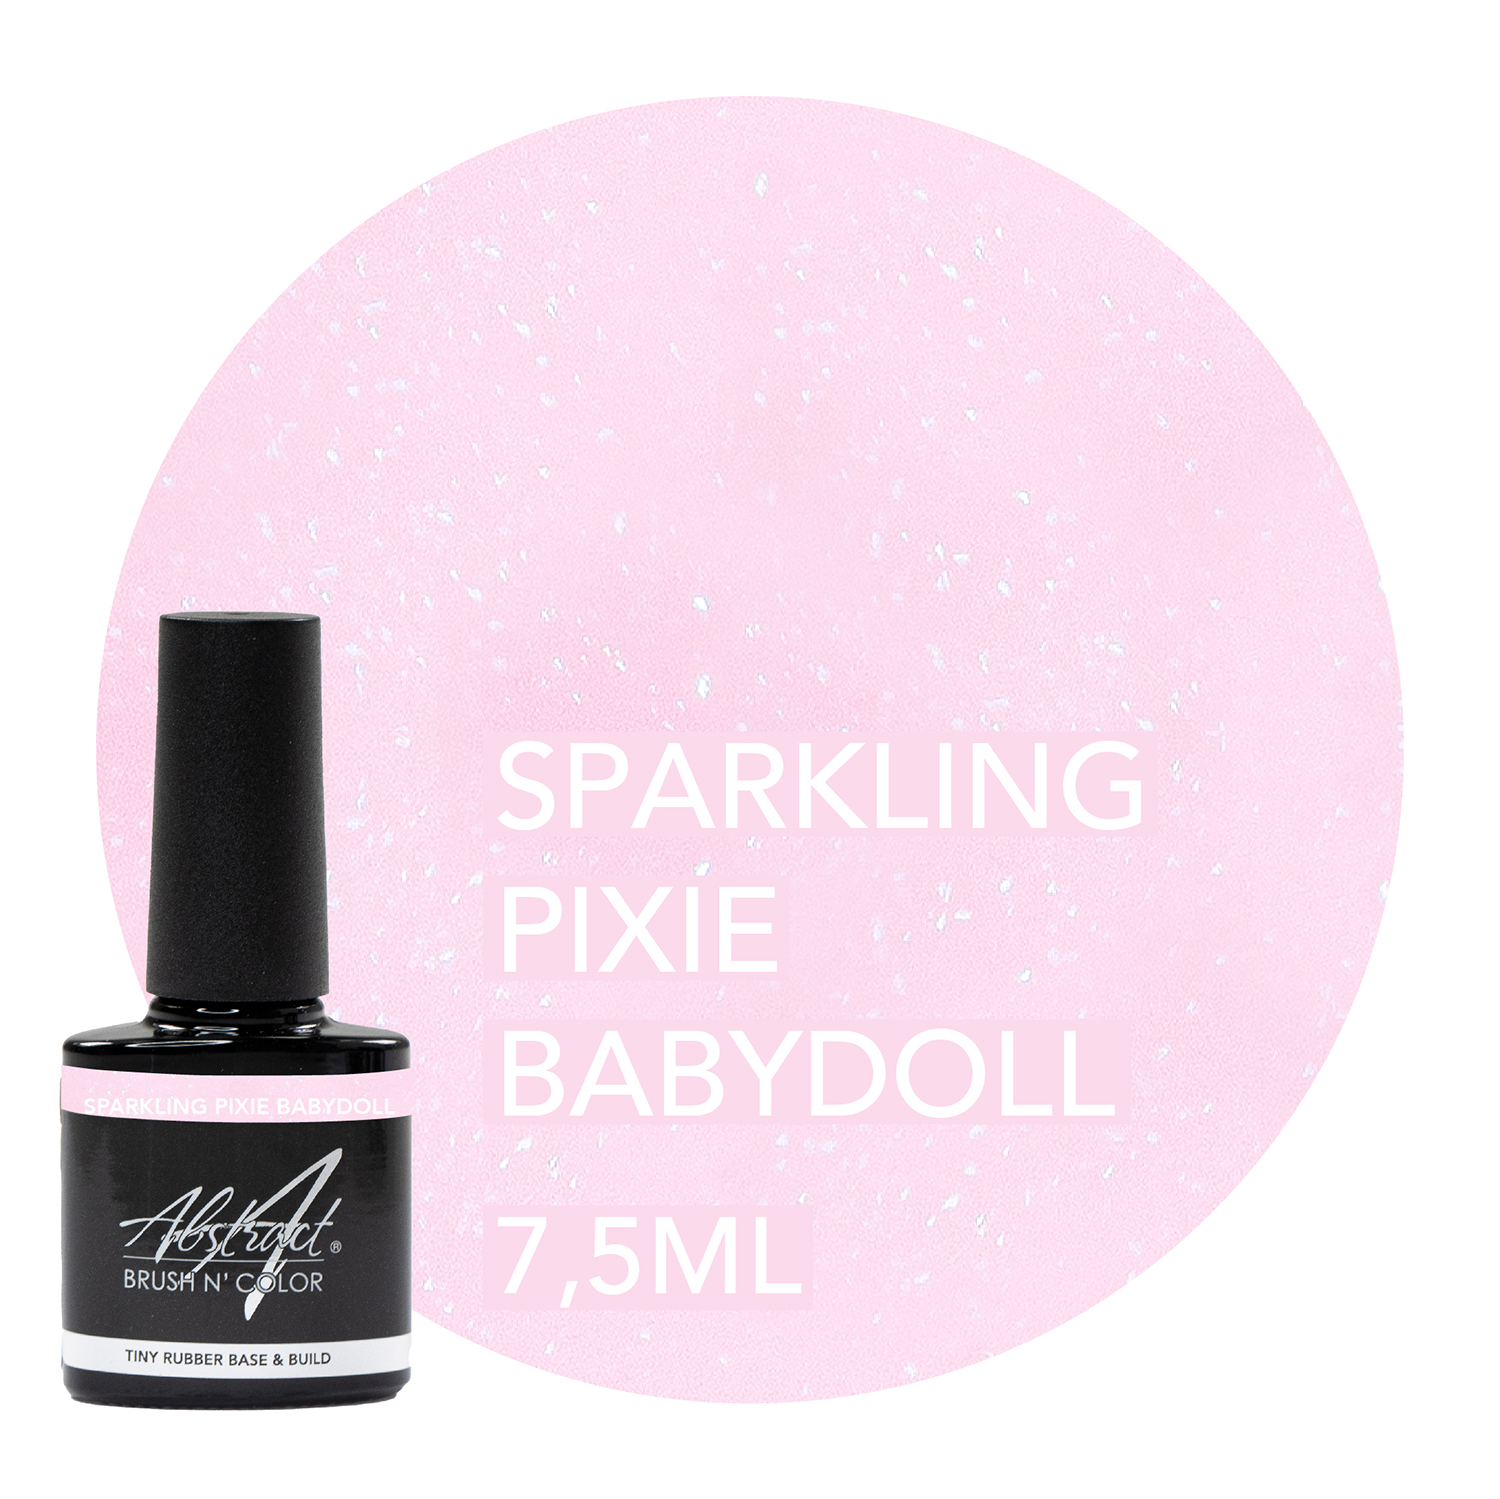 Rubber Base & Build Sparkling Pixie Babydoll 7,5ml, Abstract | 066364